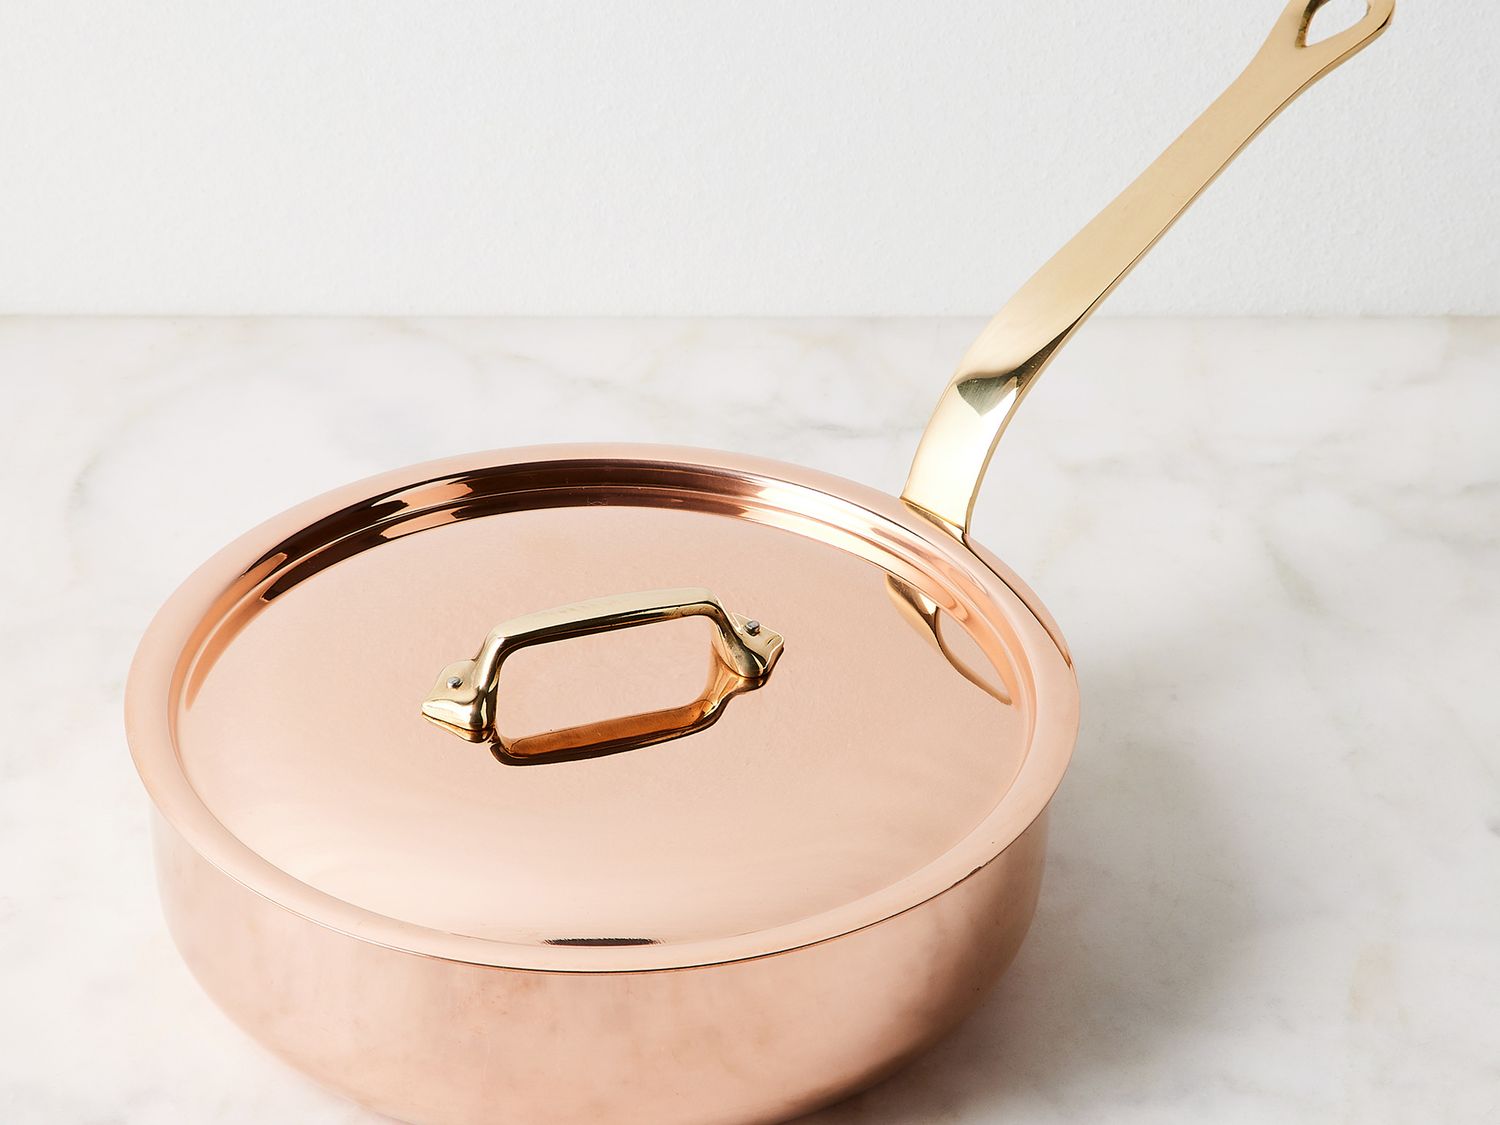 A Visit to Mauviel Copper Cookware Factory